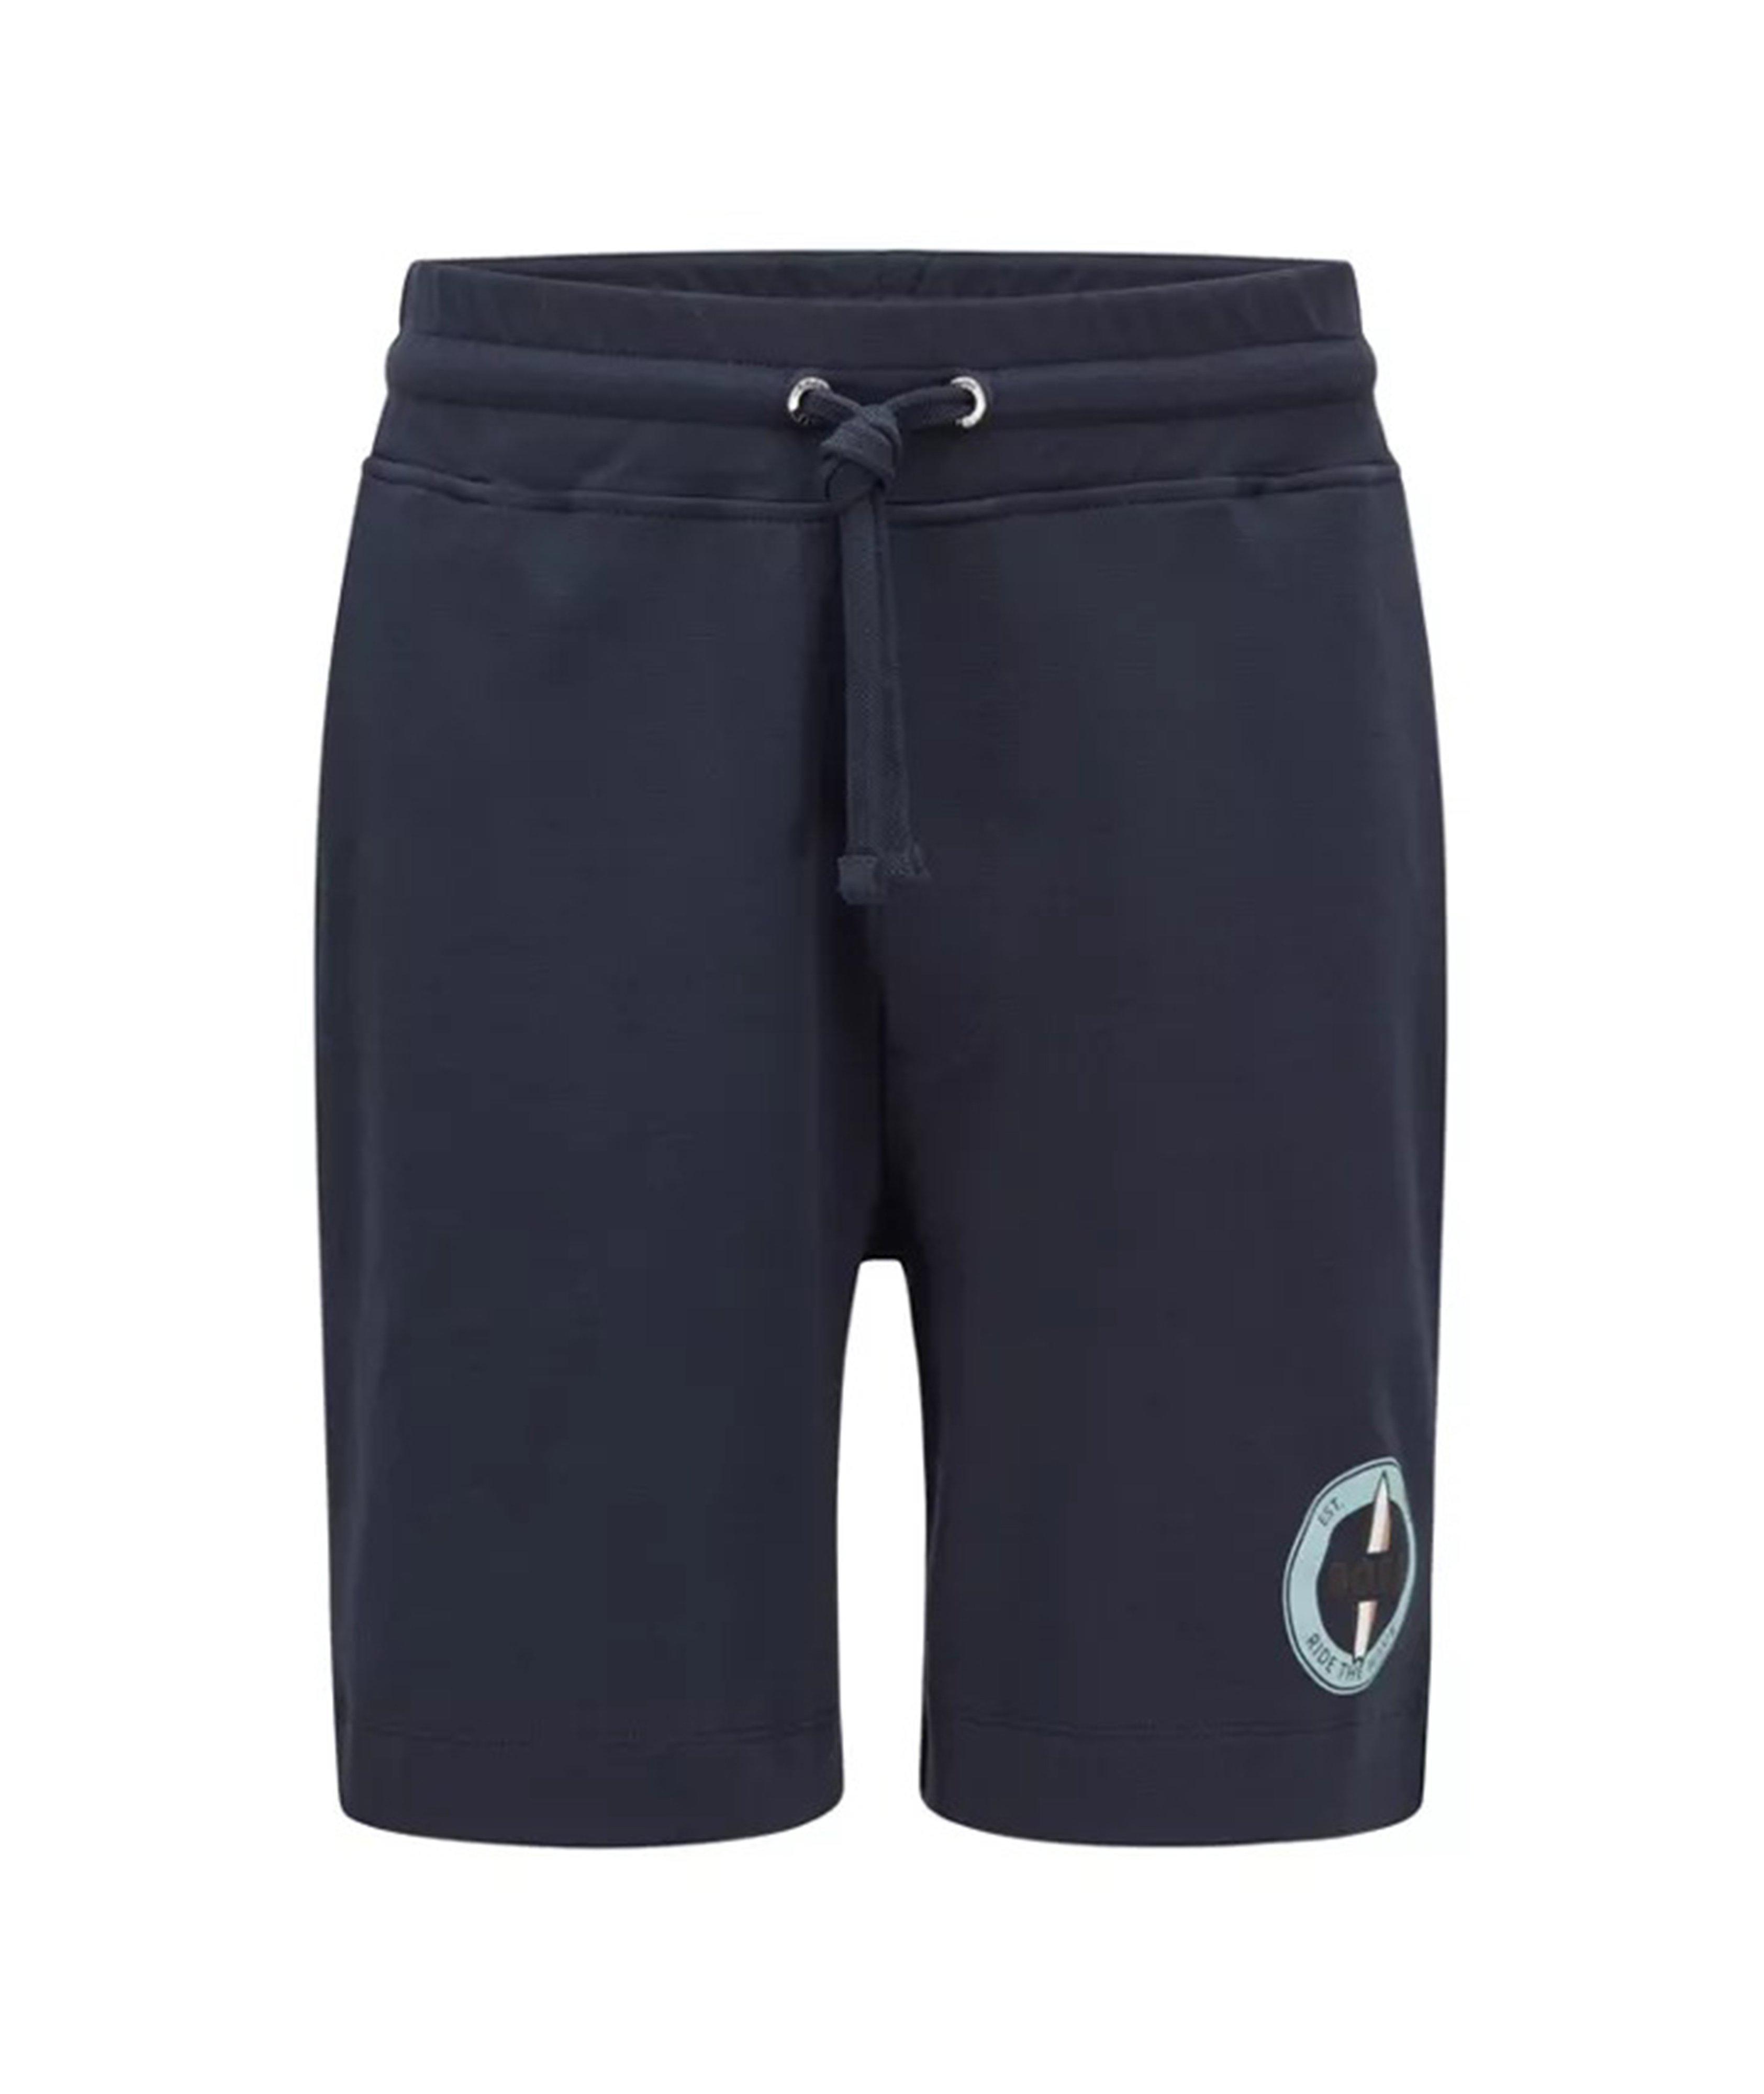 Less Water Collection Cotton Drawstring Shorts image 0